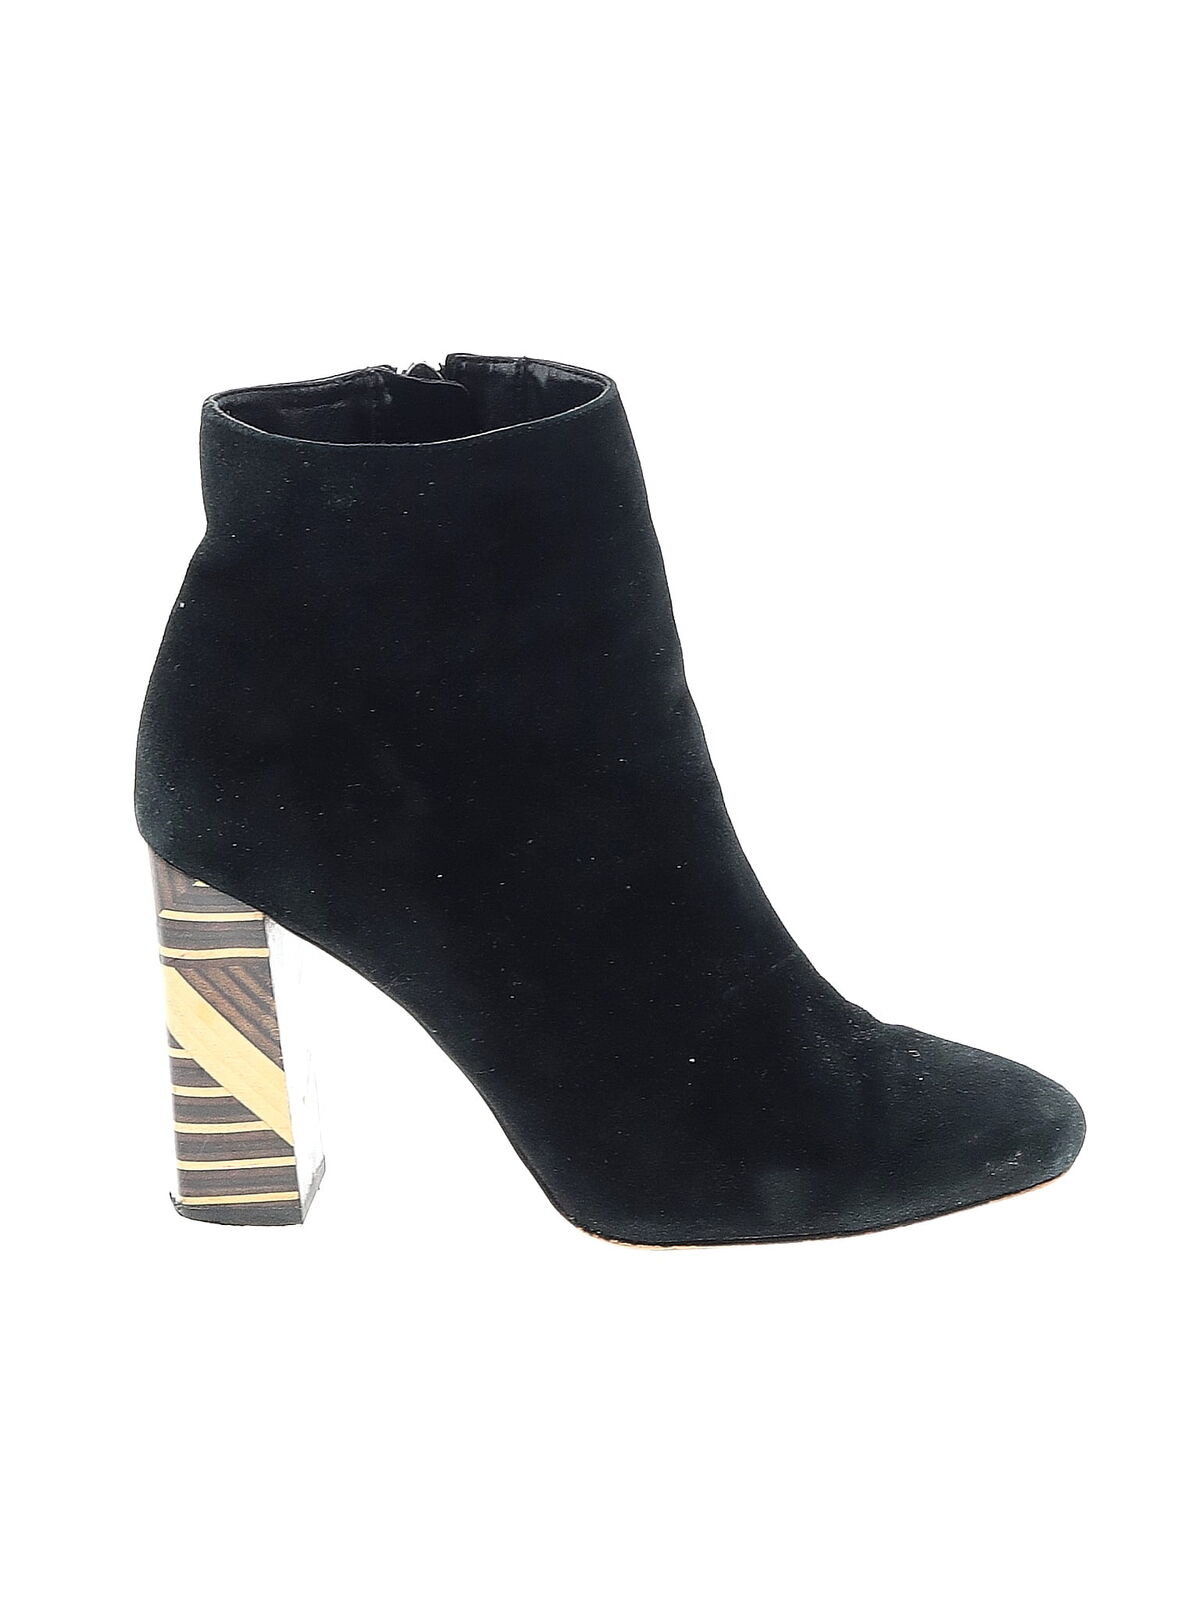 Vince Camuto Women Black Ankle Boots 7.5 - image 1